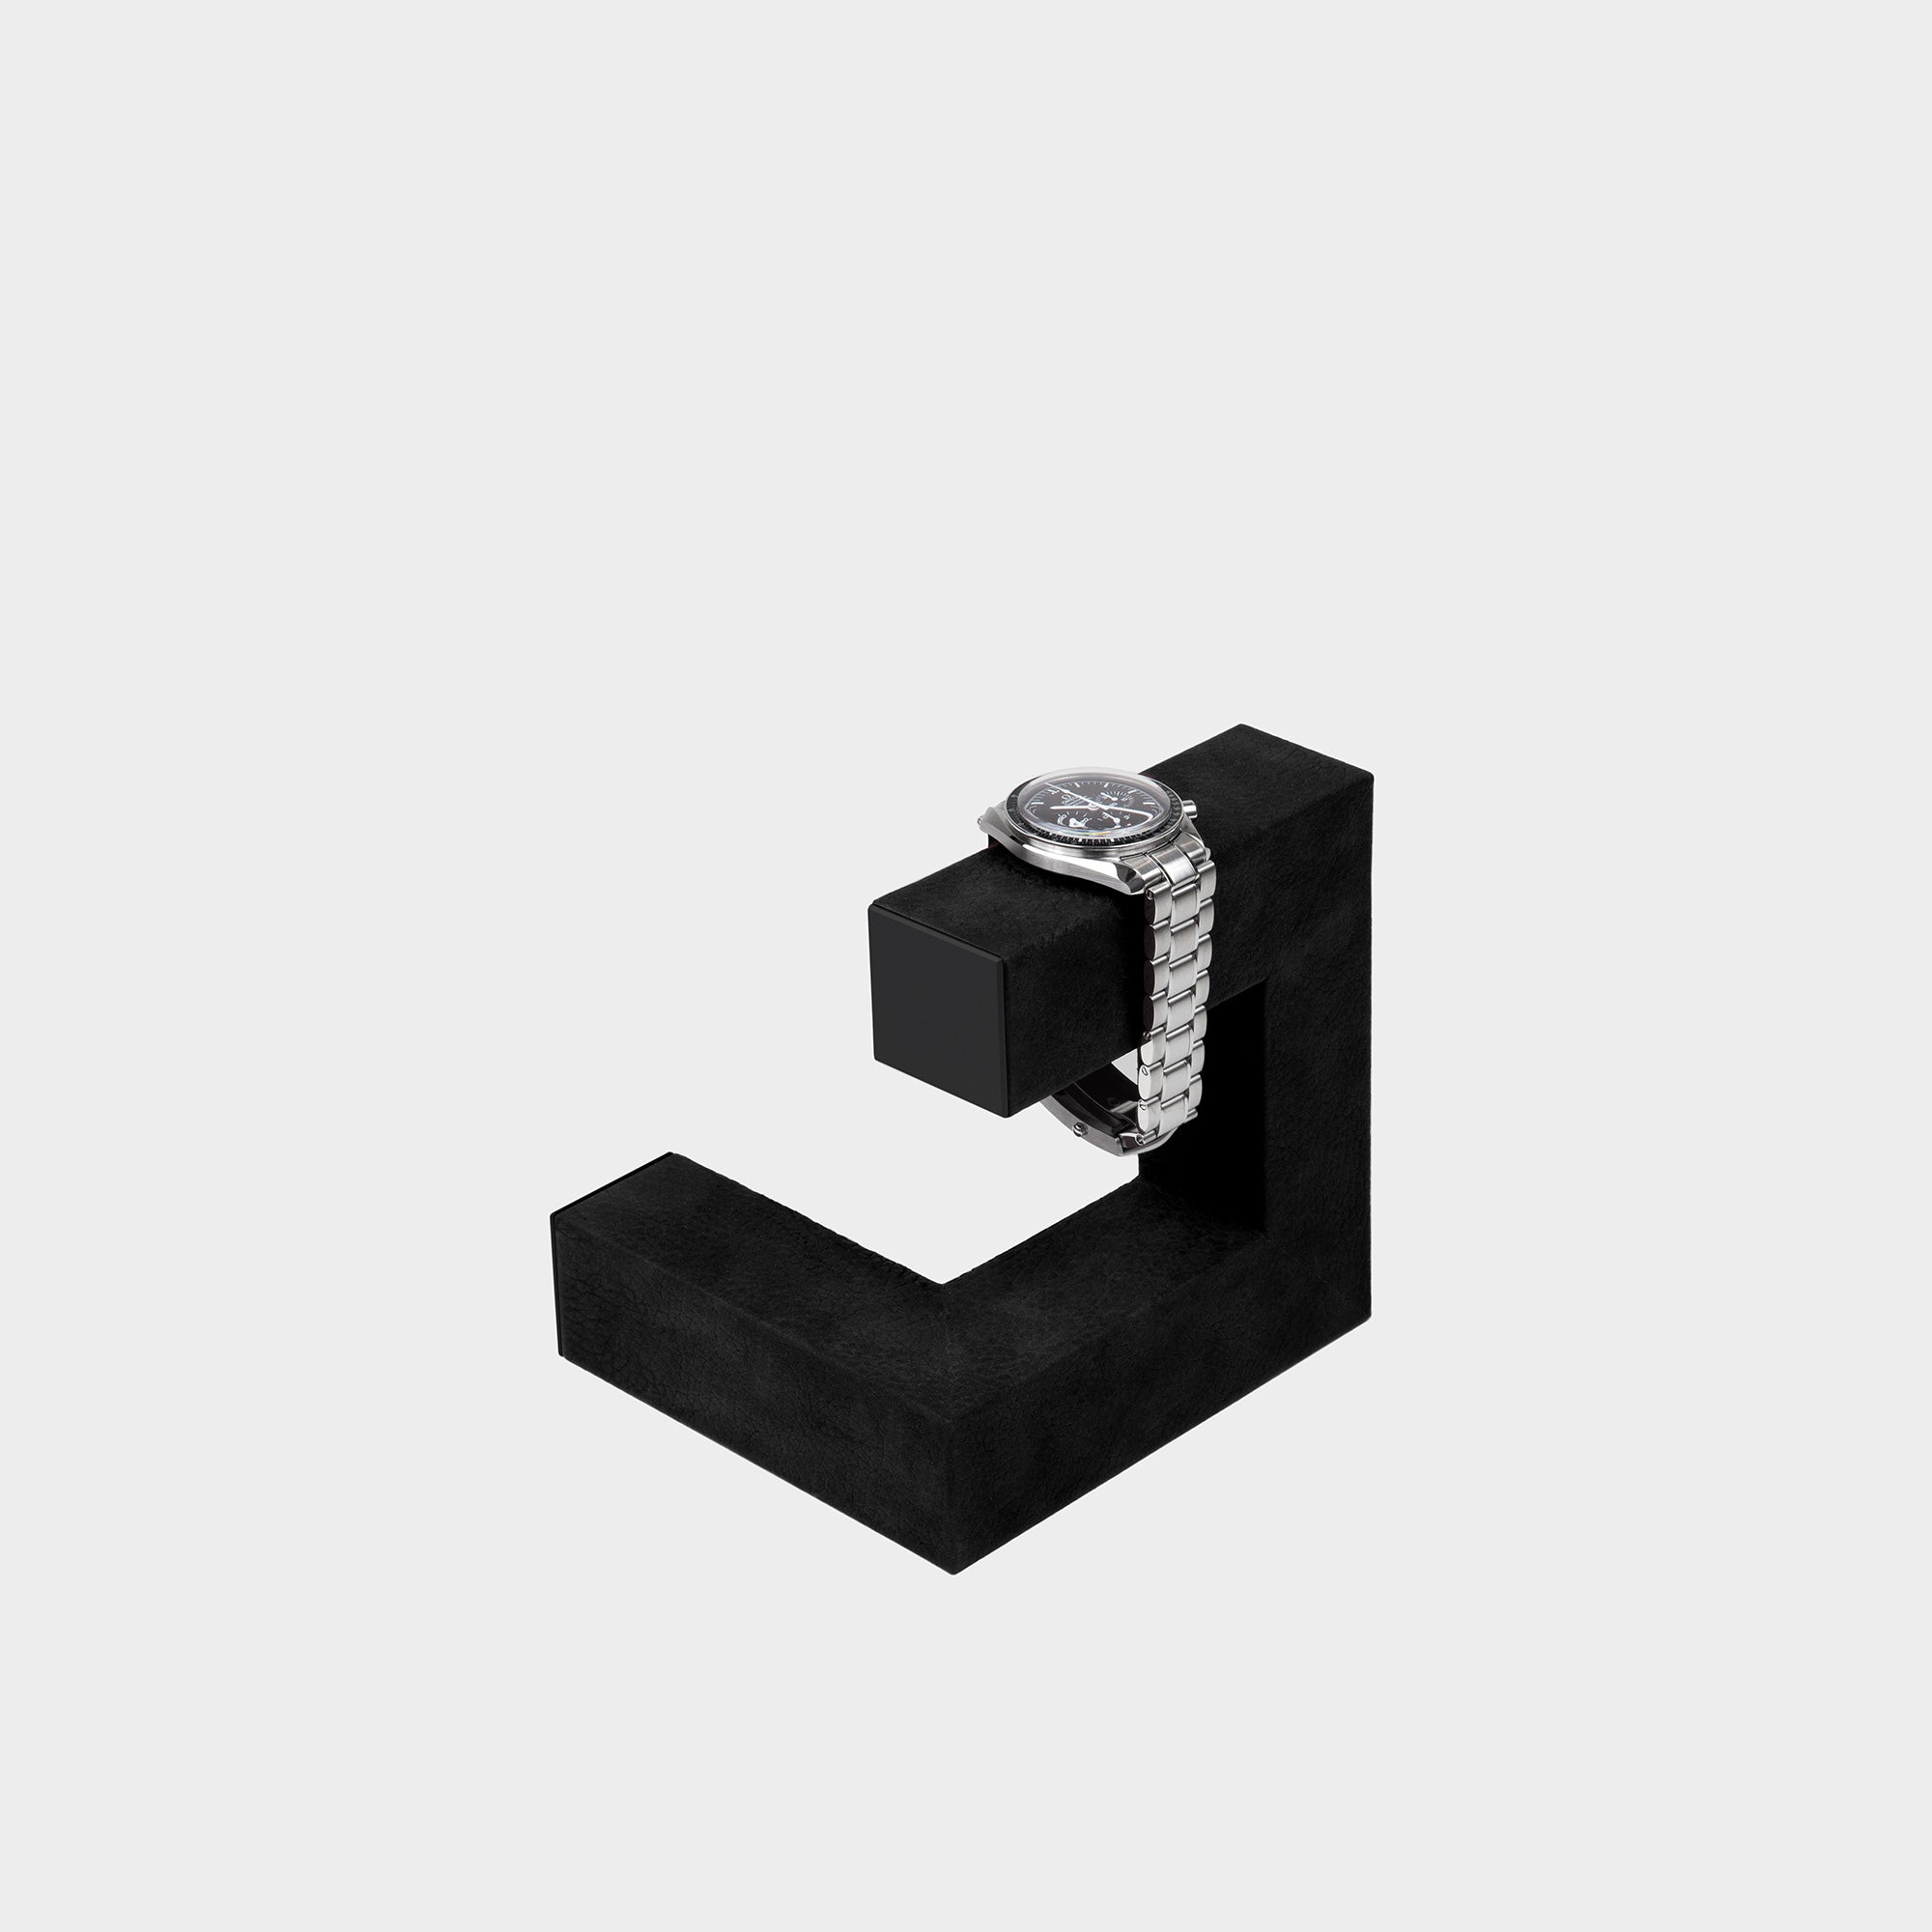 Product photo of all black Hudson 1 watch stand by Charles Simon holding 1 watch.